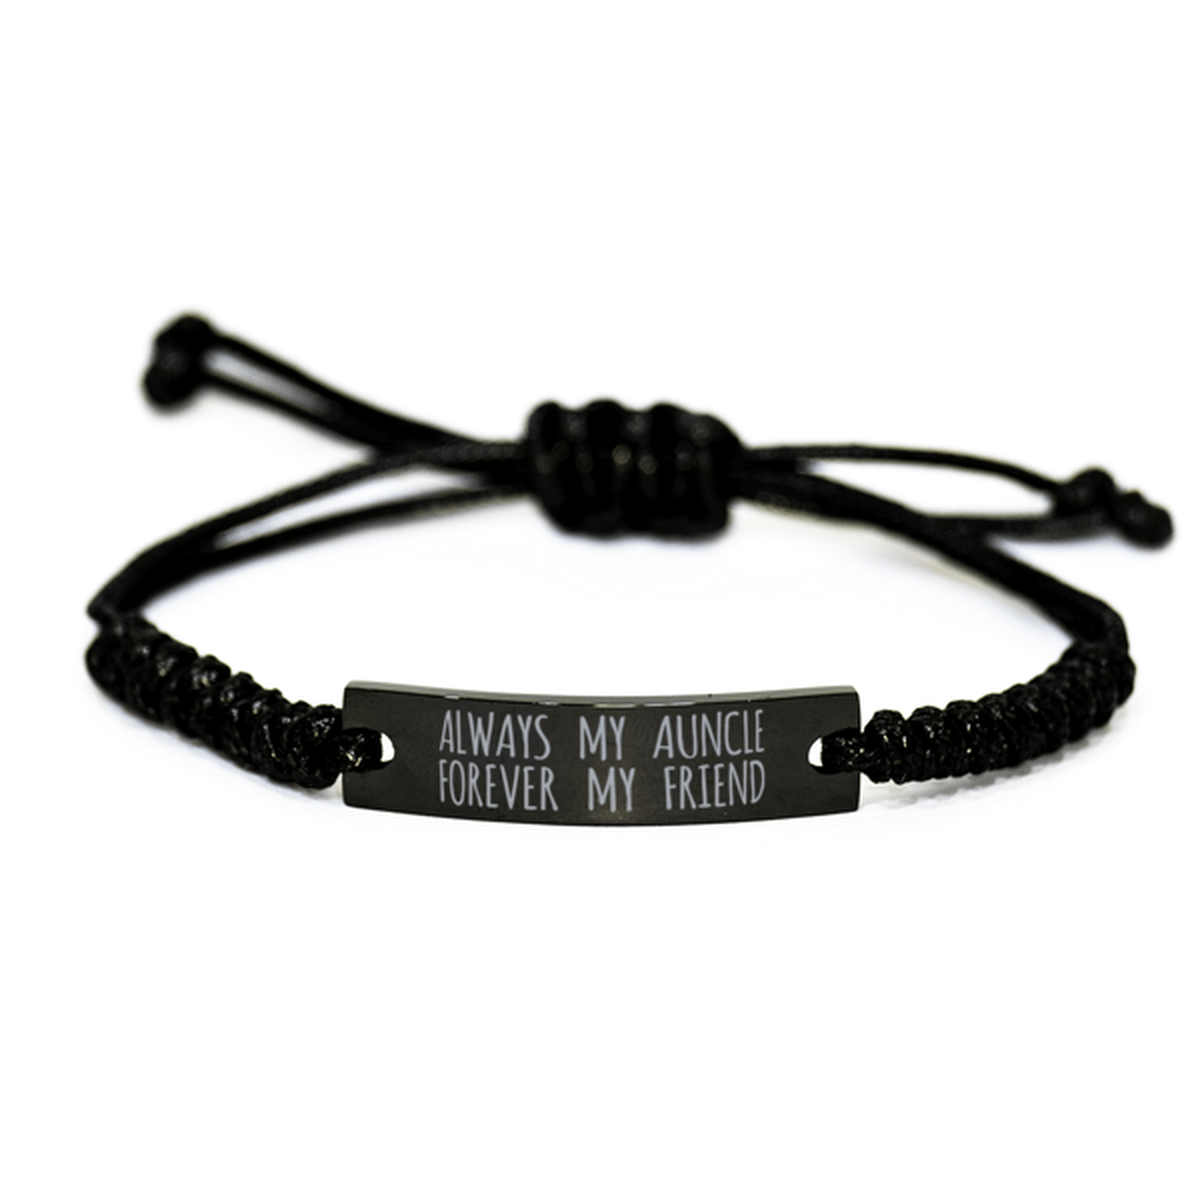 Inspirational Auncle Black Rope Bracelet, Always My Auncle Forever My Friend, Best Birthday Gifts For Family